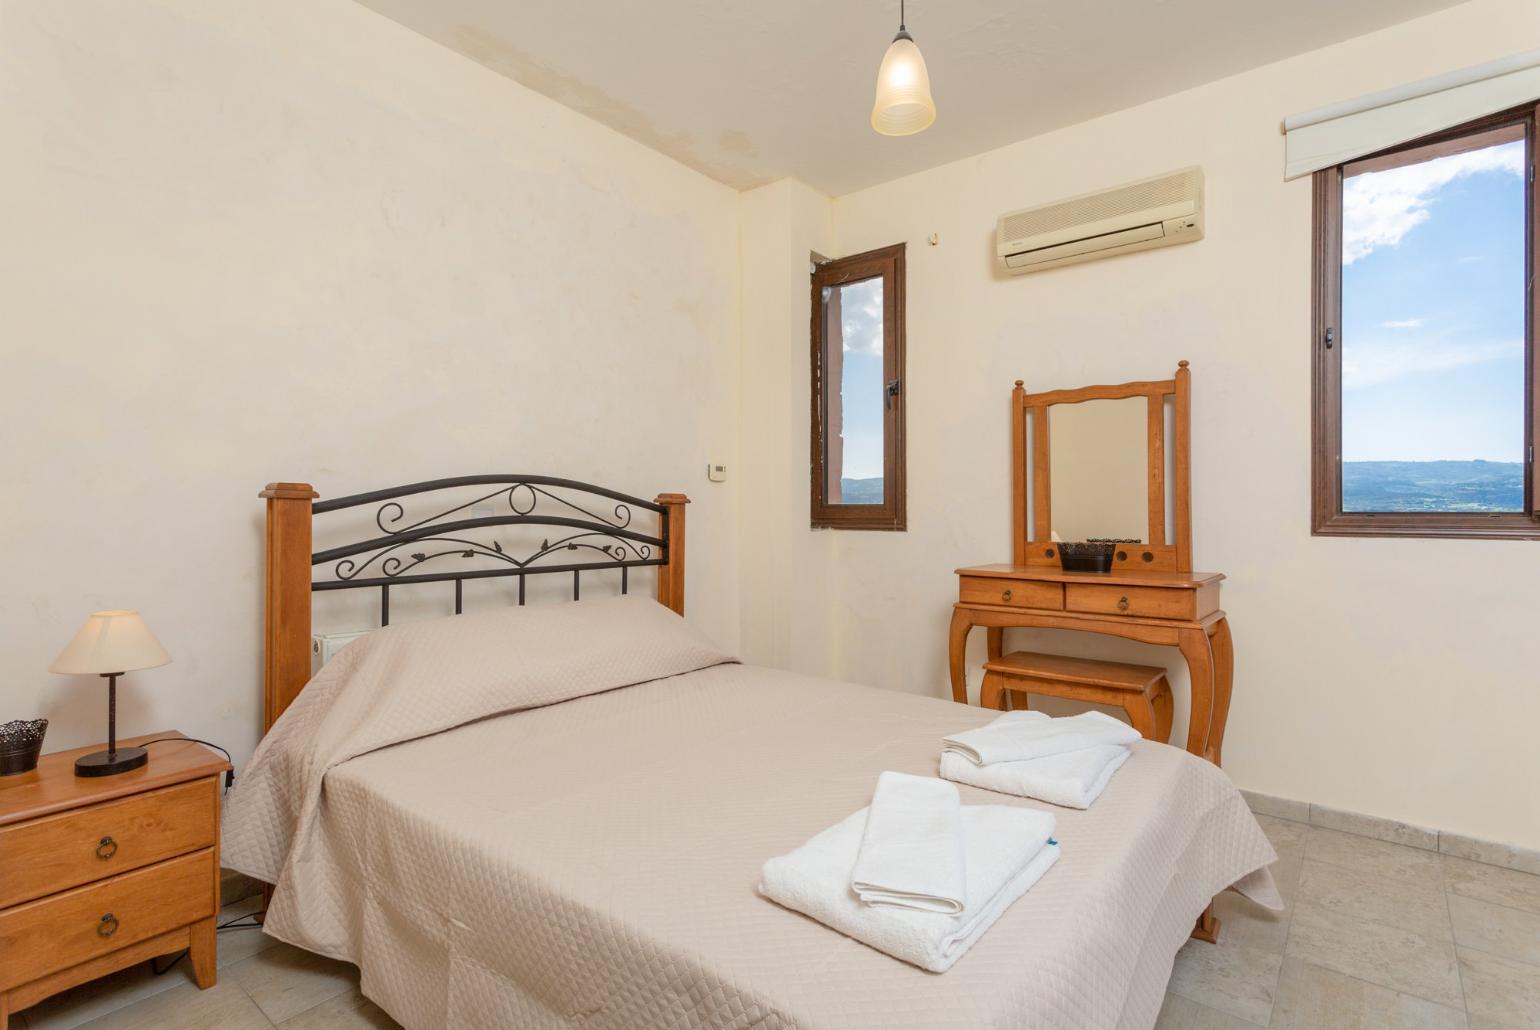 Double bedroom with en suite bathroom, A/C, and balcony access with panoramic views of the sea and countryside